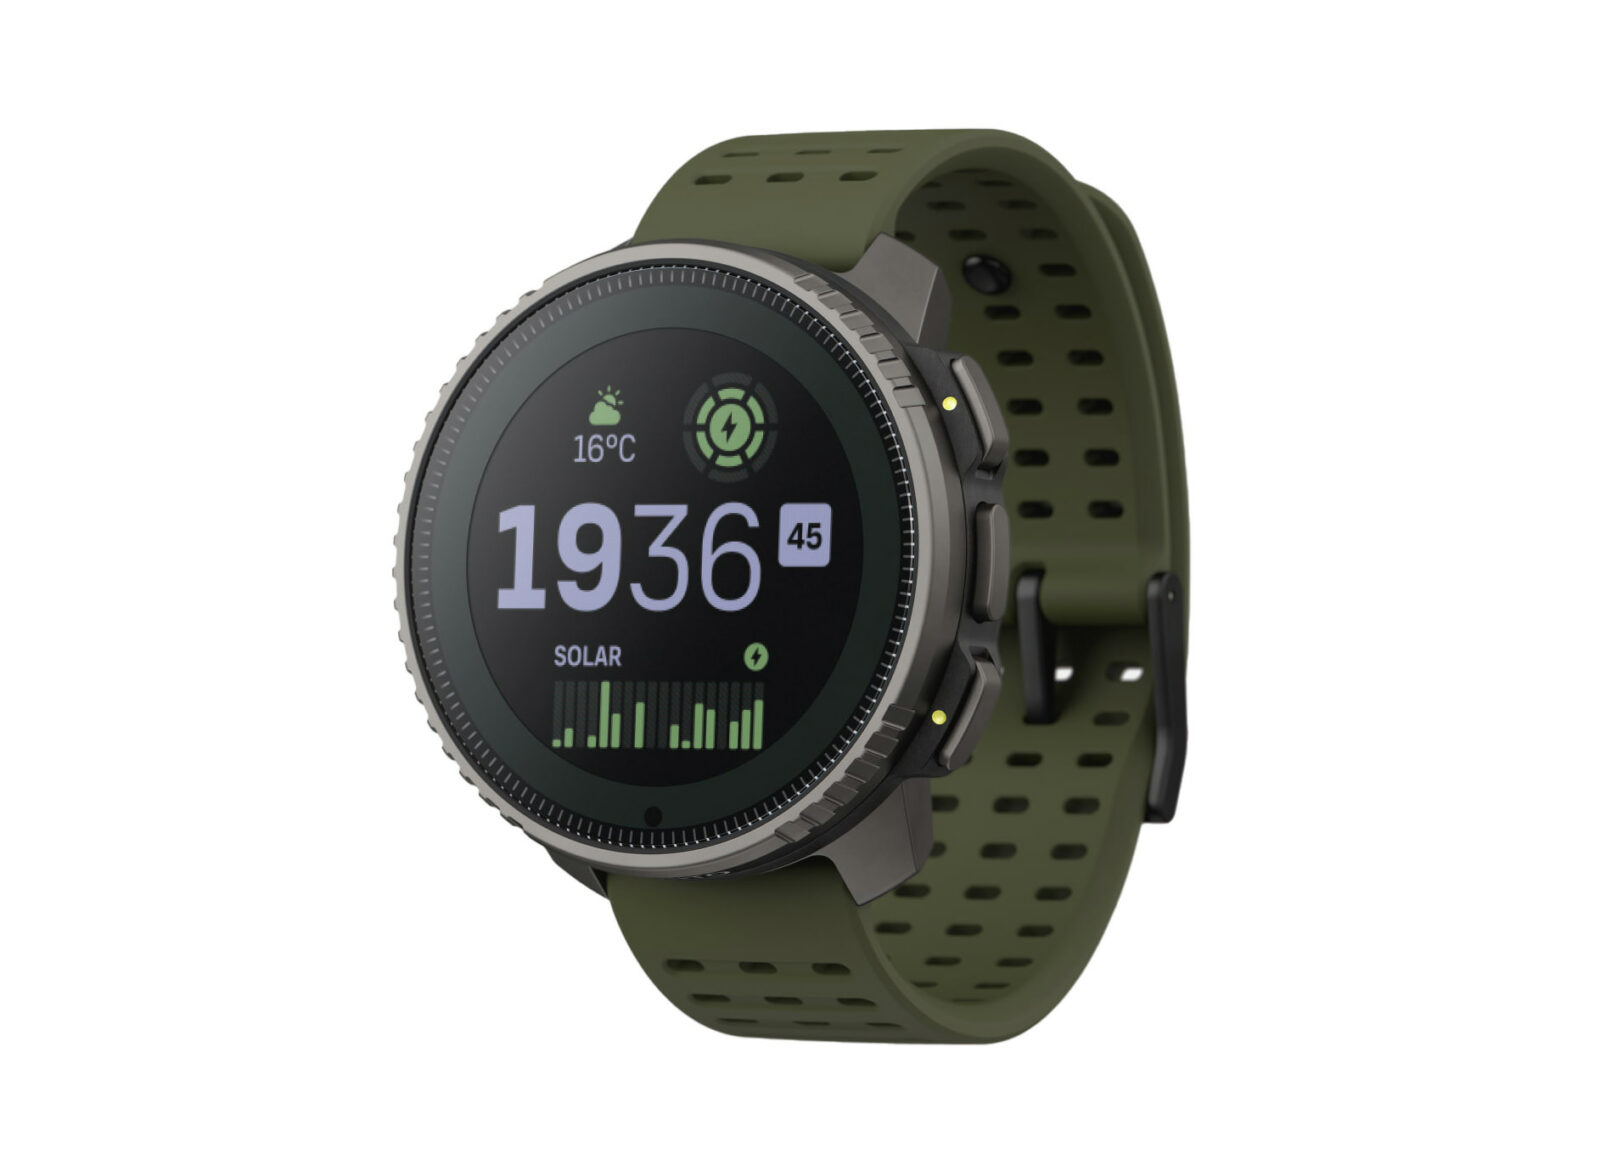 All-New Suunto Race Watches - First Class Watches Blog